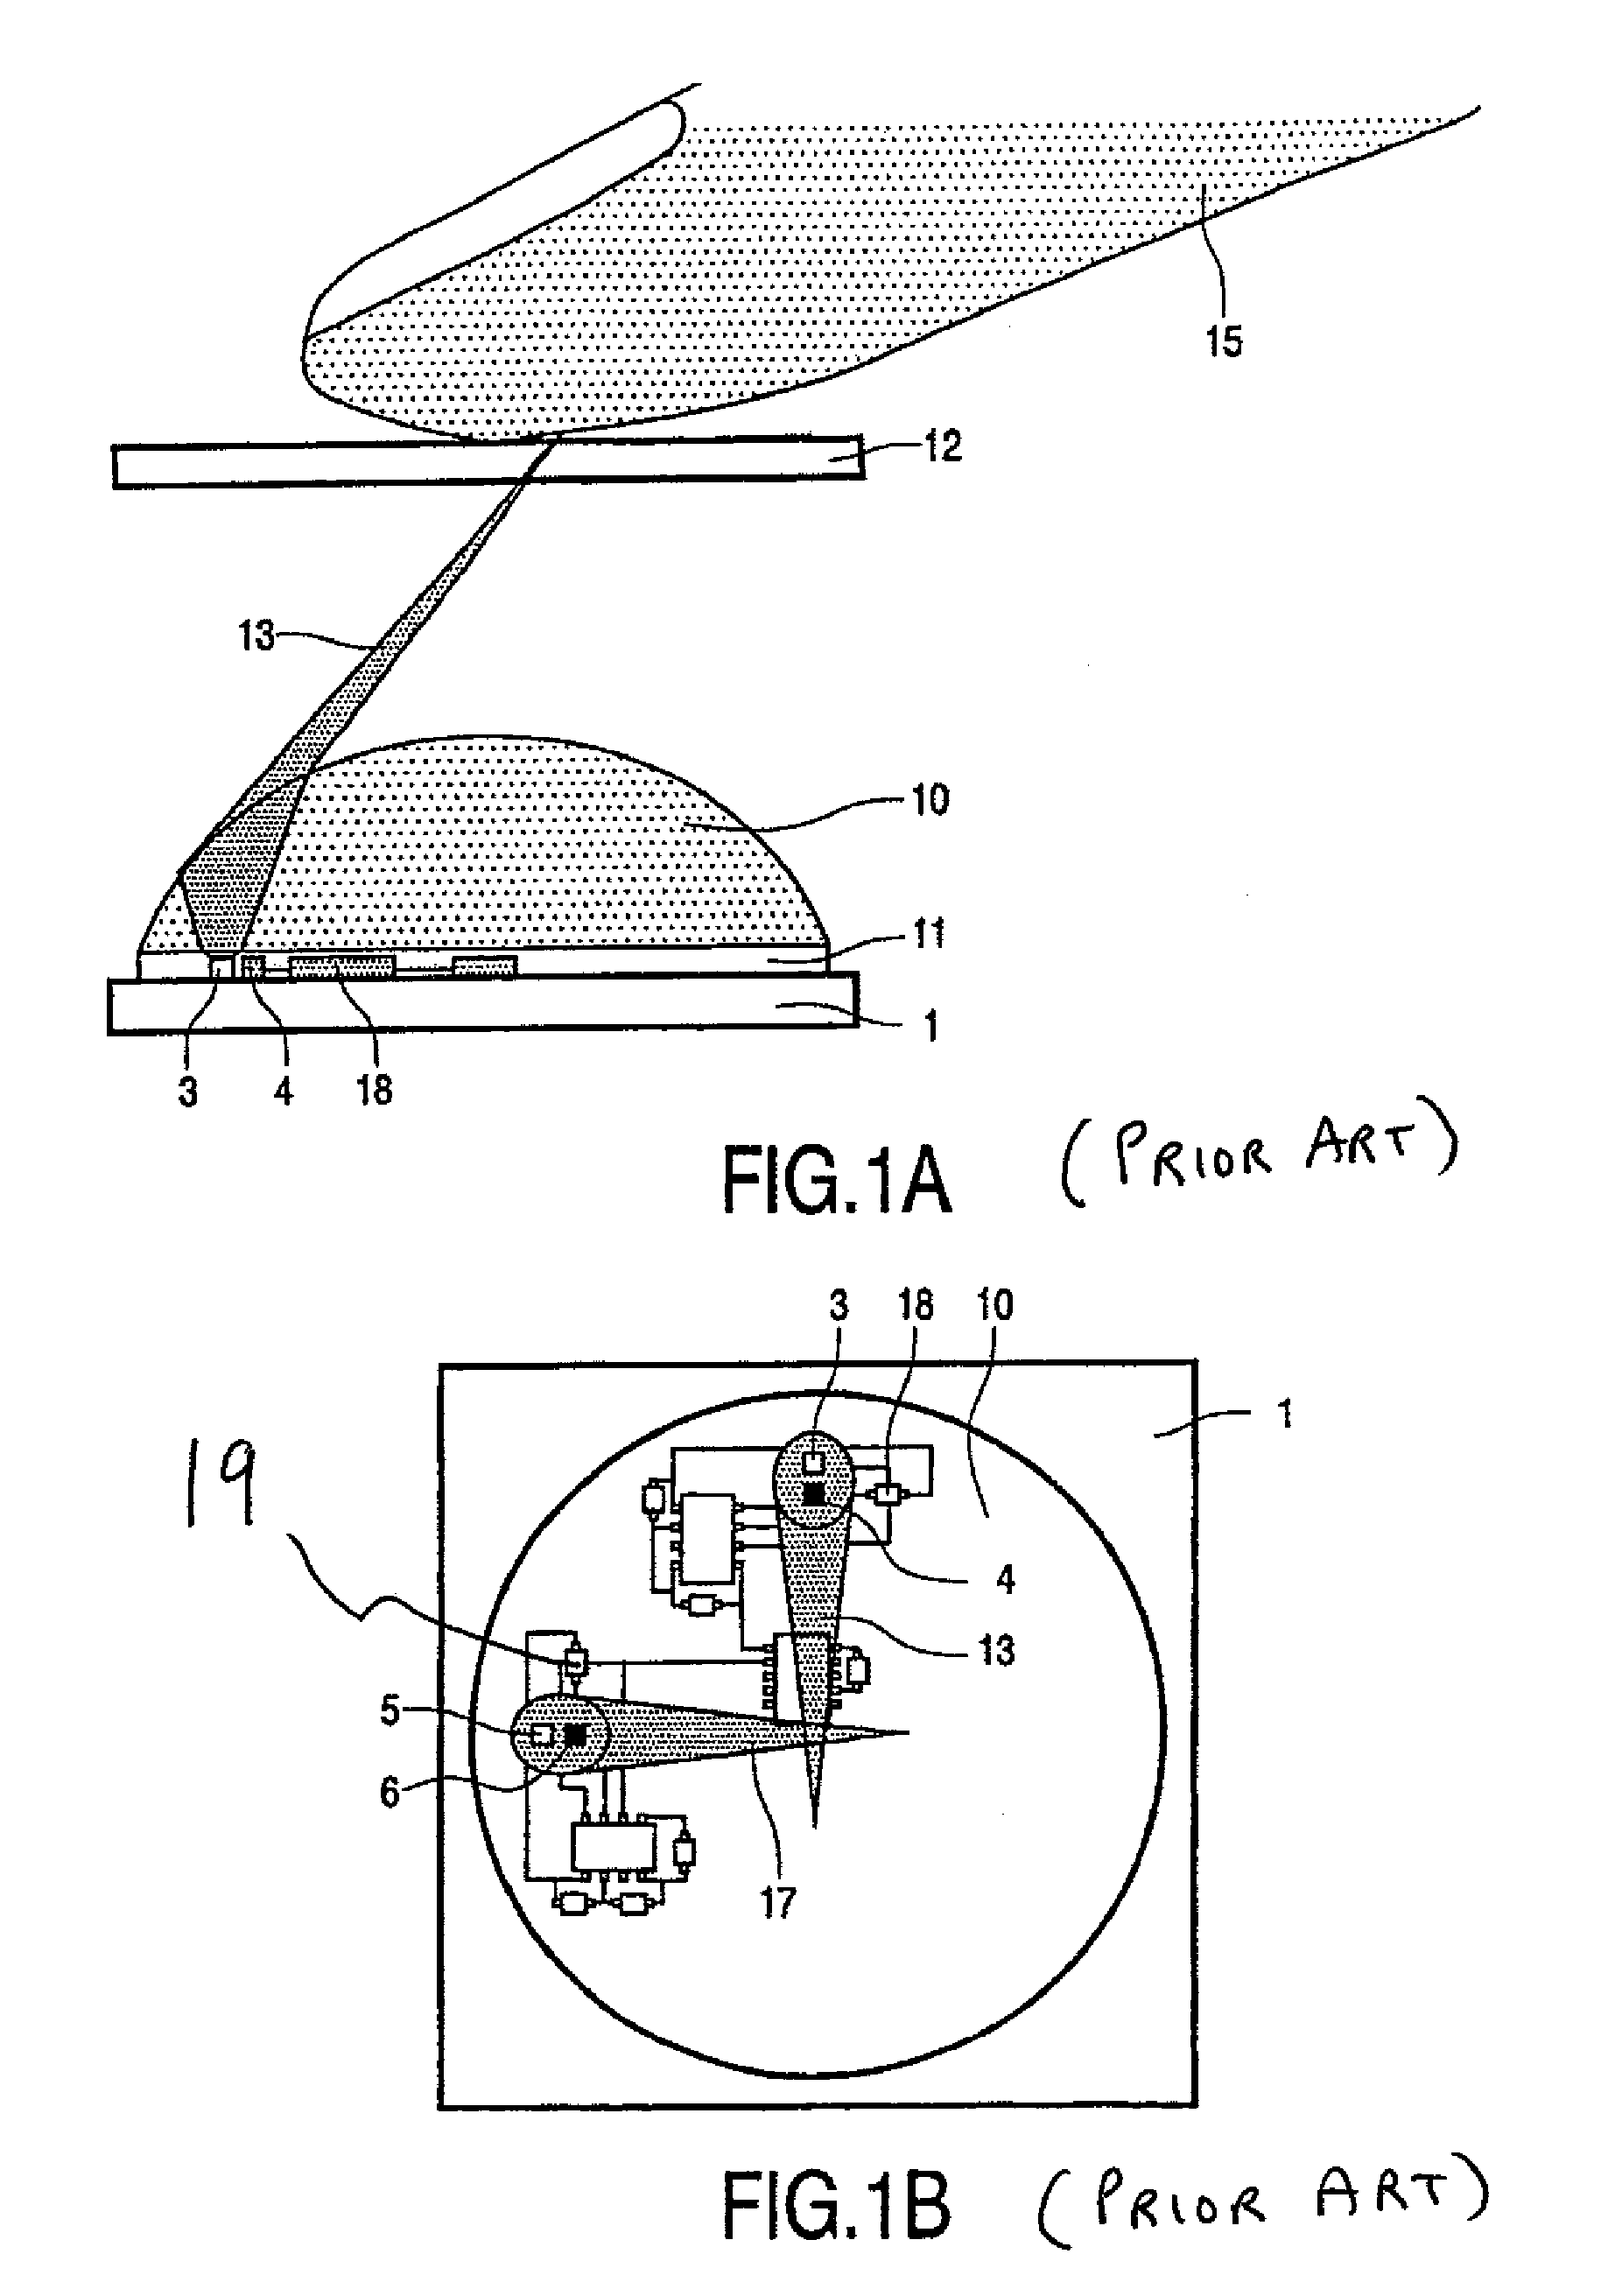 Apparatus equipped with an optical keyboard and optical input device